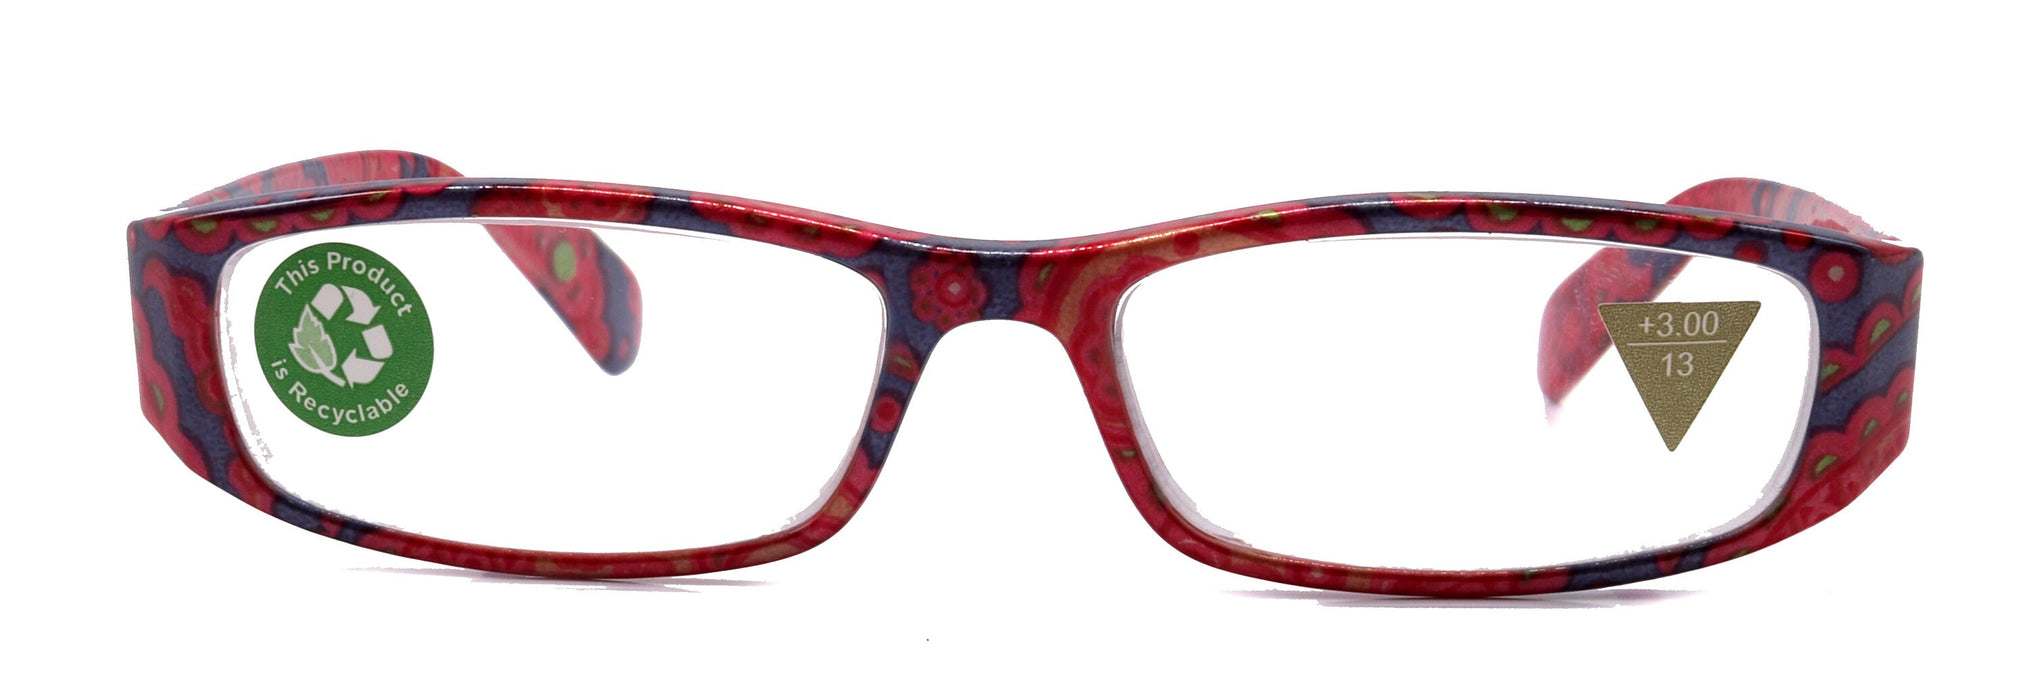 Florence, (Premium) Reading Glasses, High End Readers +1.25 to +3.00 Magnifying. (Paisley, Red) optical, Rectangular Frame. NY Fifth Avenue